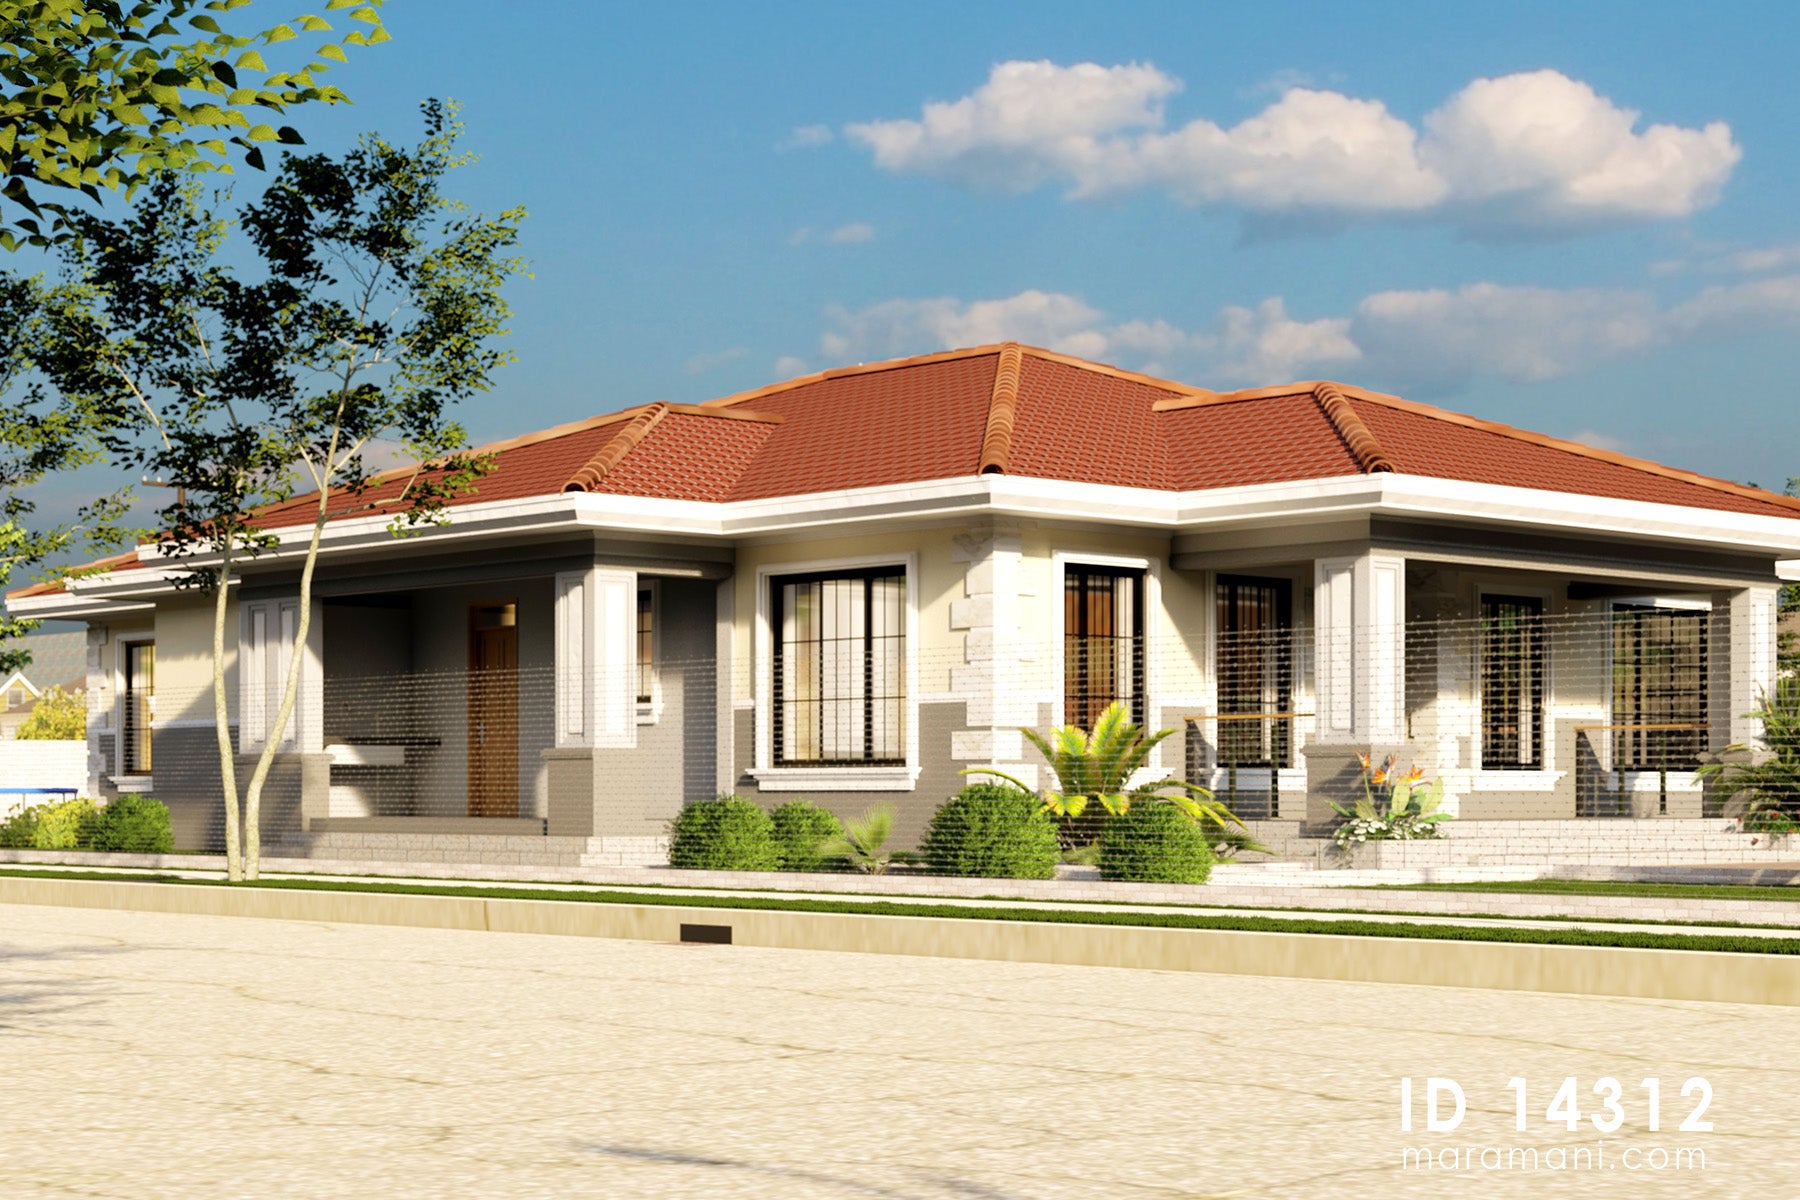 4-Bedroom Hipped roof house - ID 14312